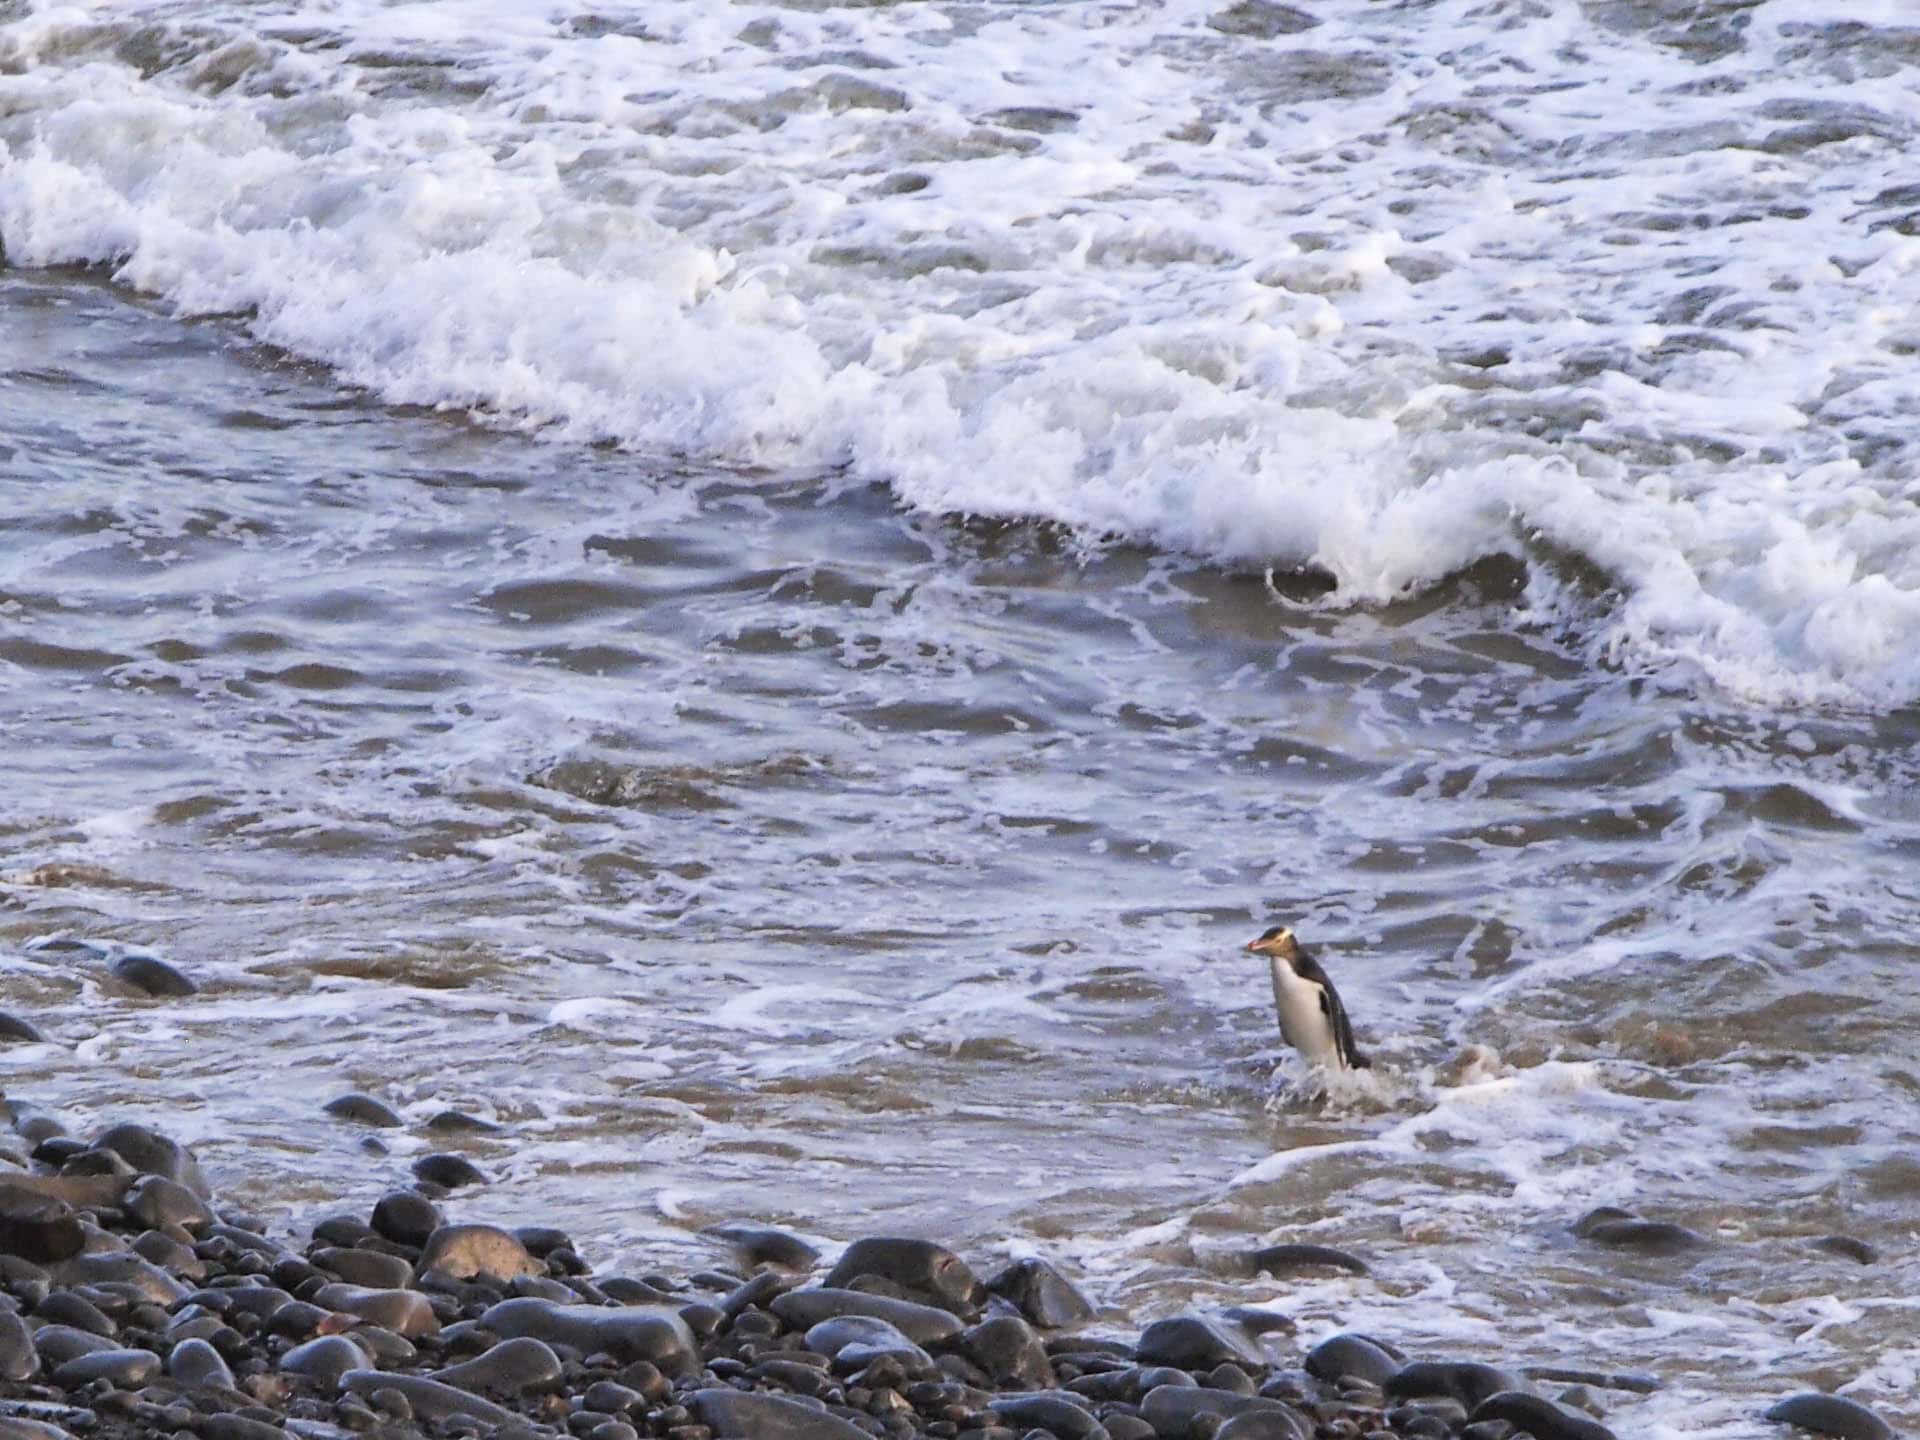 After a day at sea, a yellow-eyed penguin returns to Nugget Point